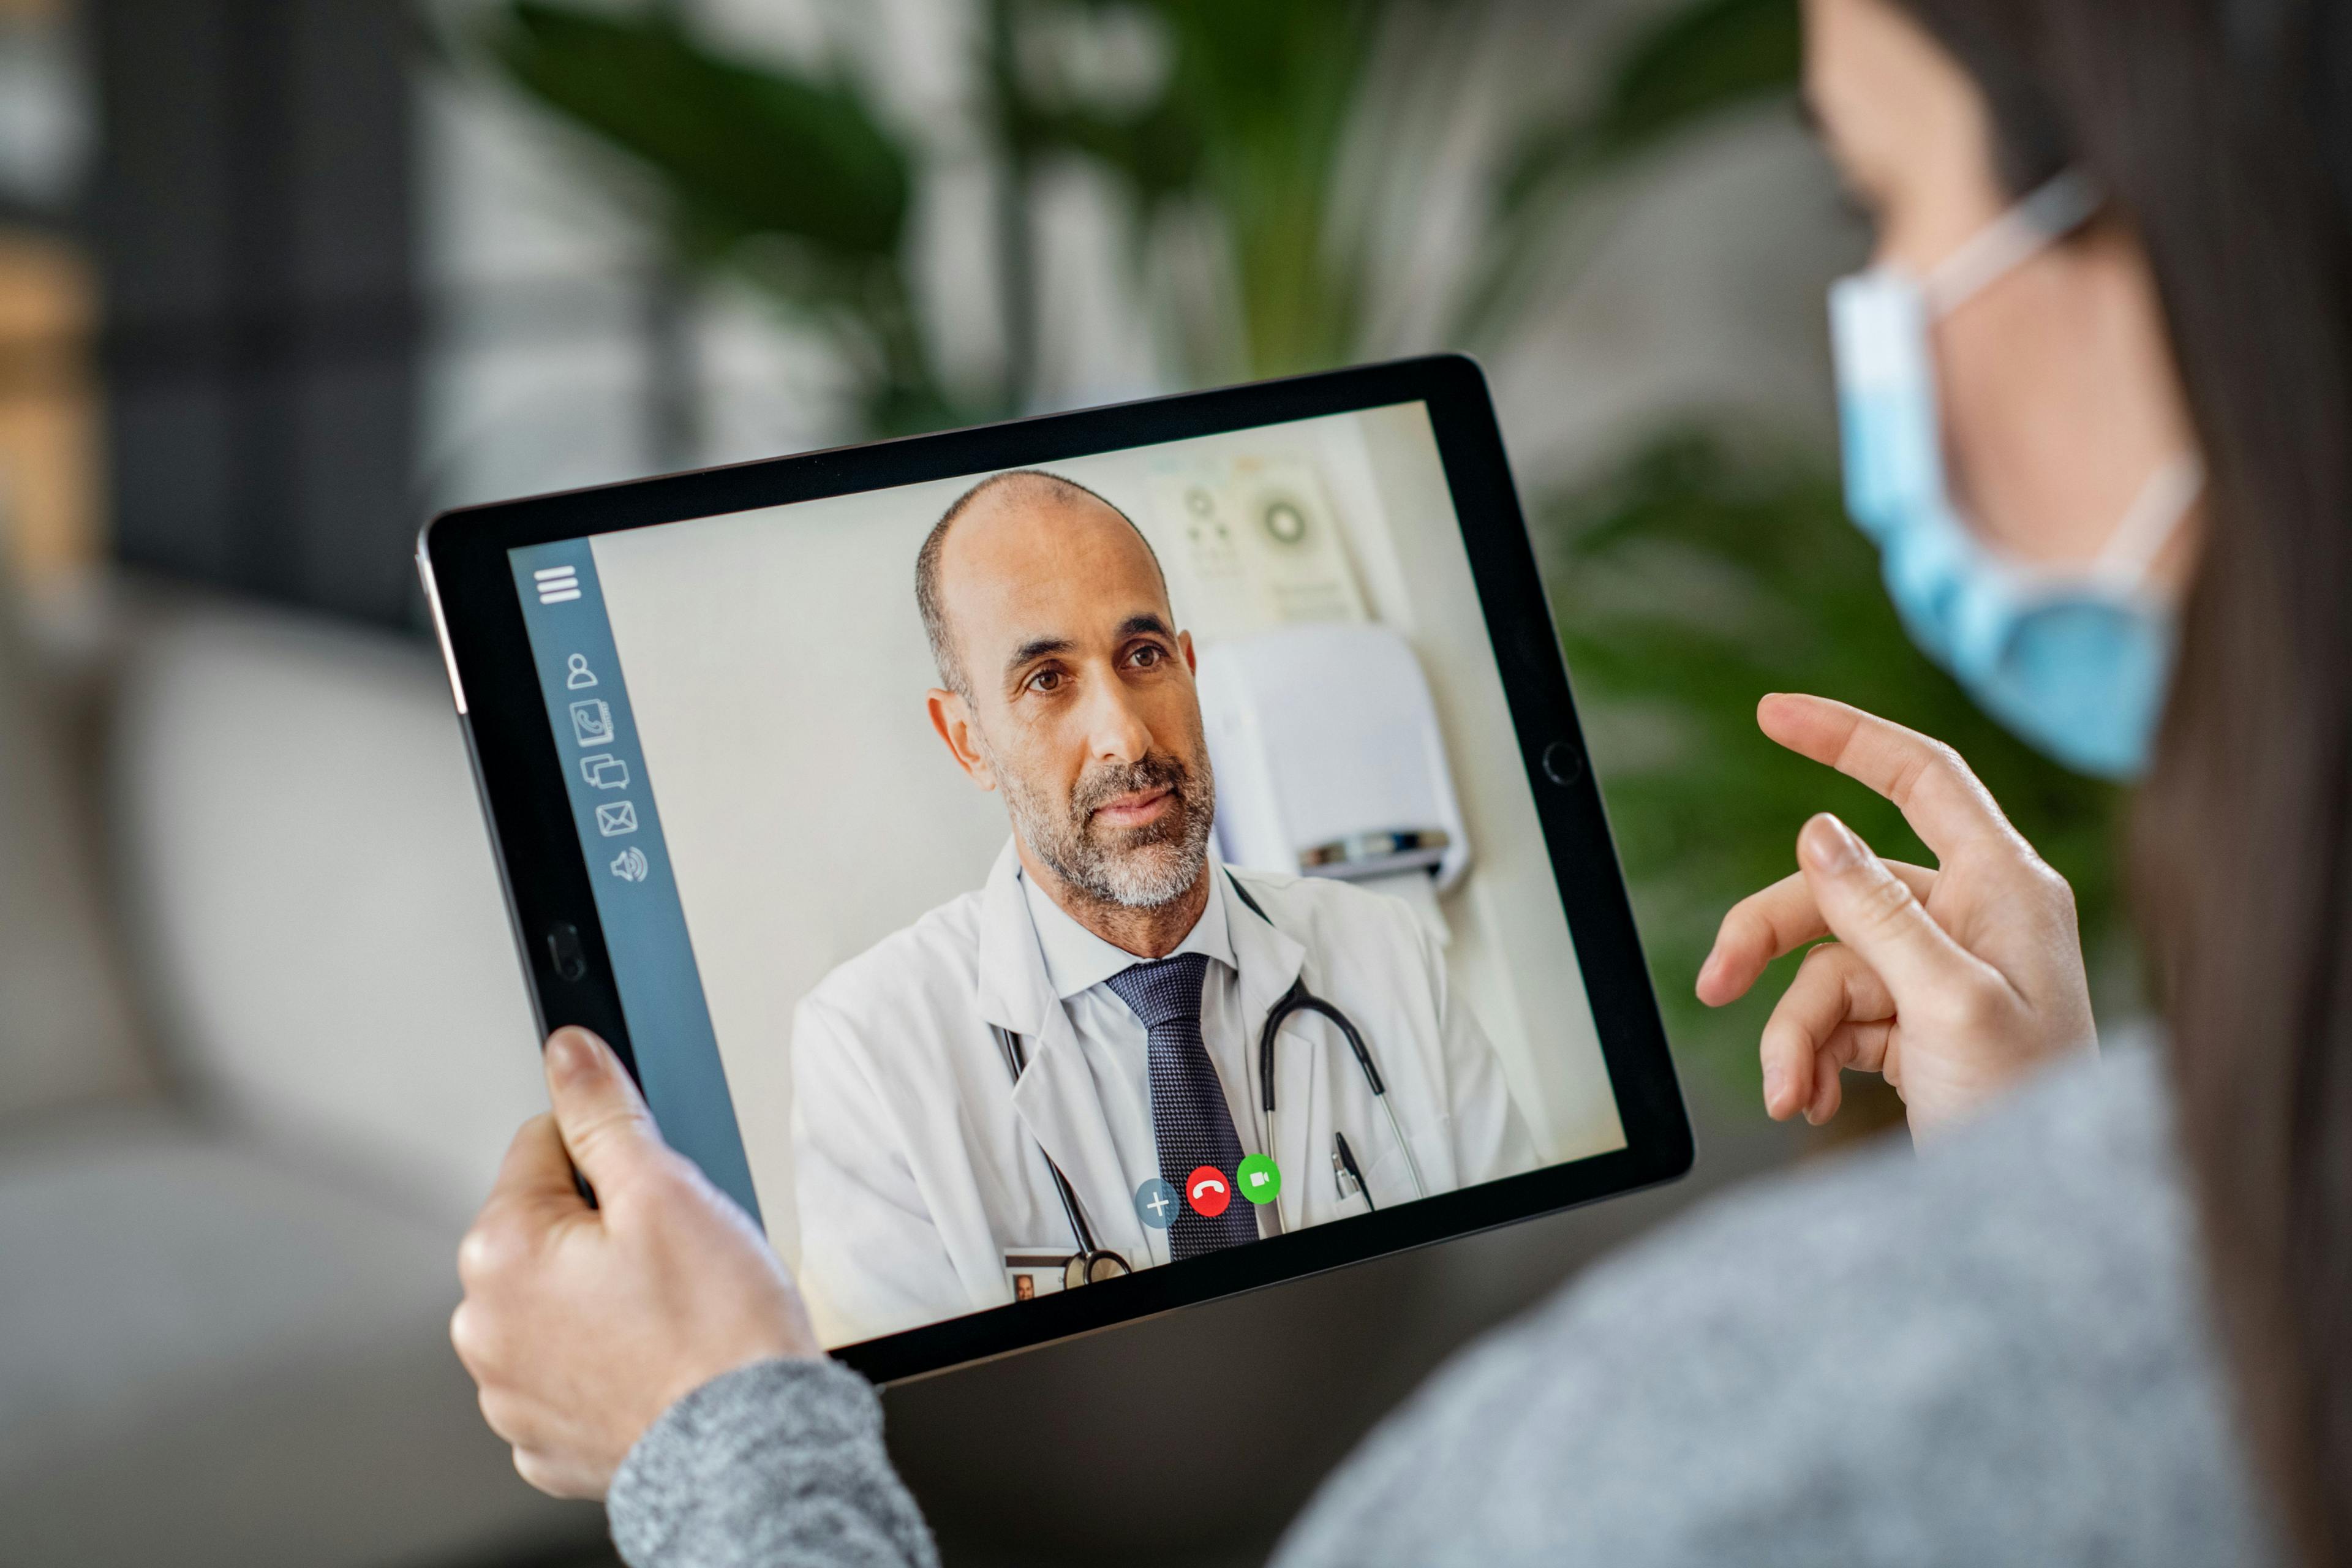 Patient on video chat with doctor